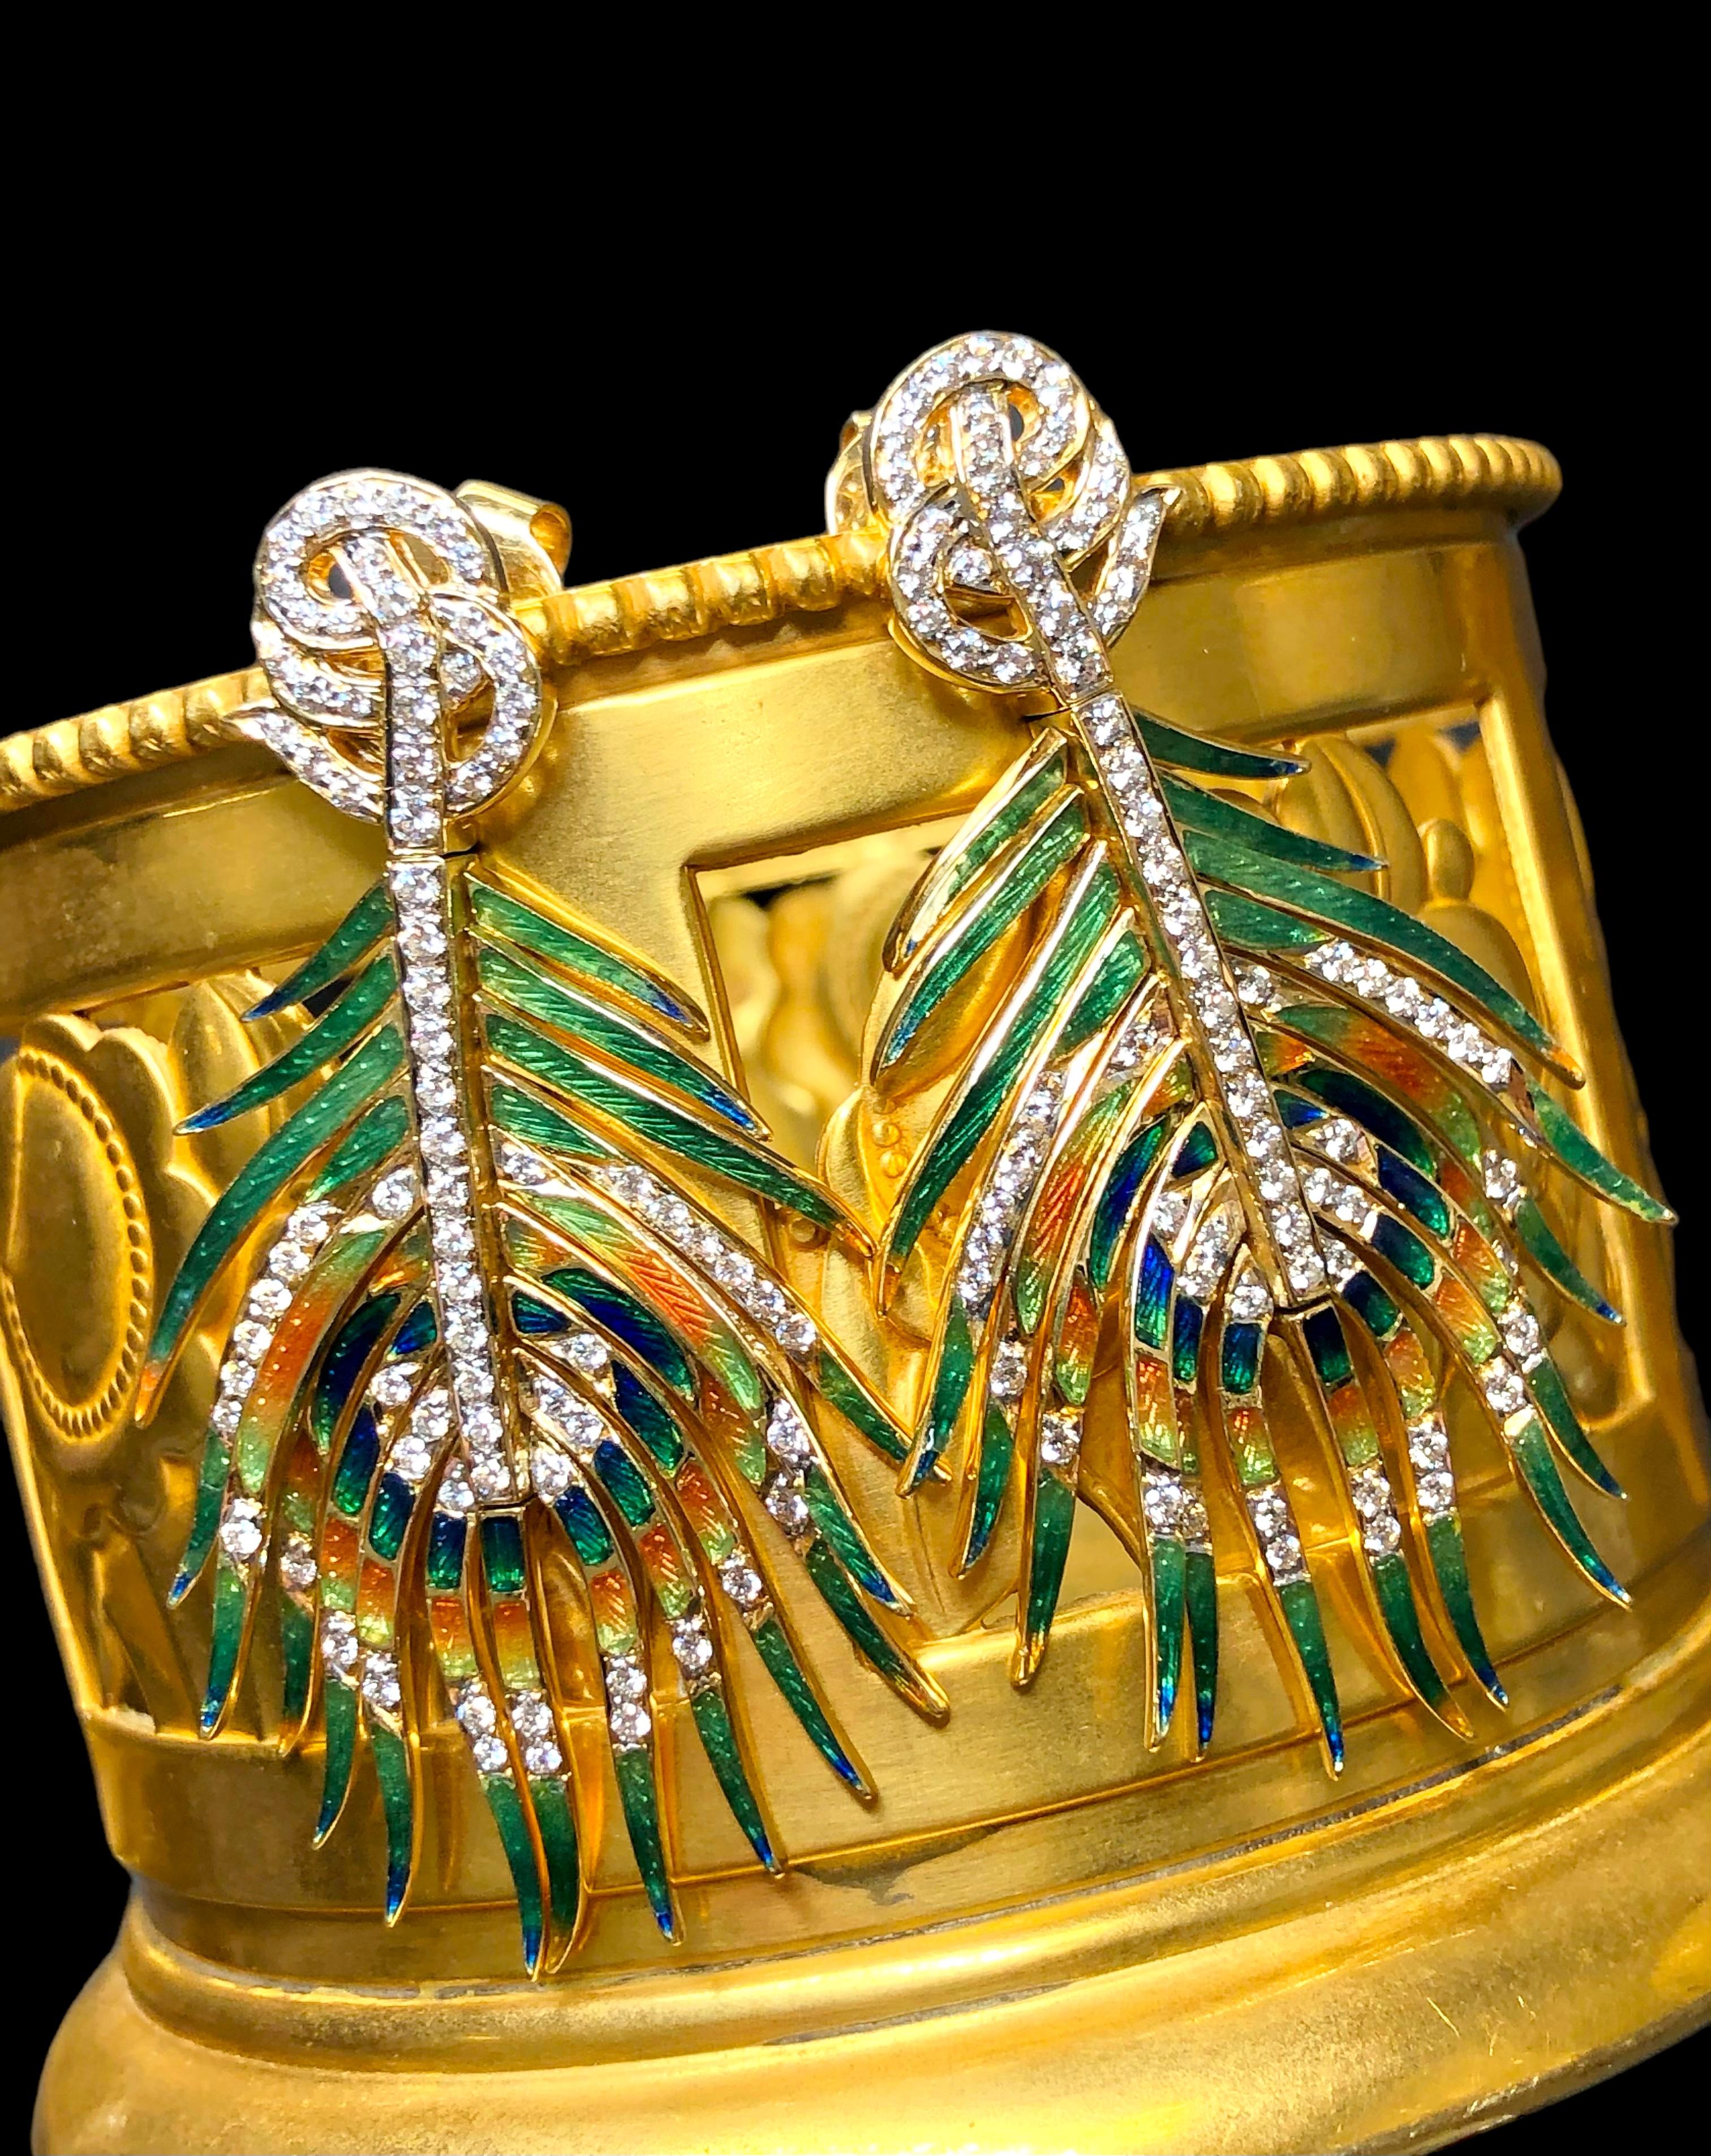 
An exceptional pair of vintage 1960’s earrings hand crafted in 18K yellow gold and finished in multicolored enamel achieving the look a beautiful peacock feathers. Each articulating section as well as going up the center are bead set G-I color